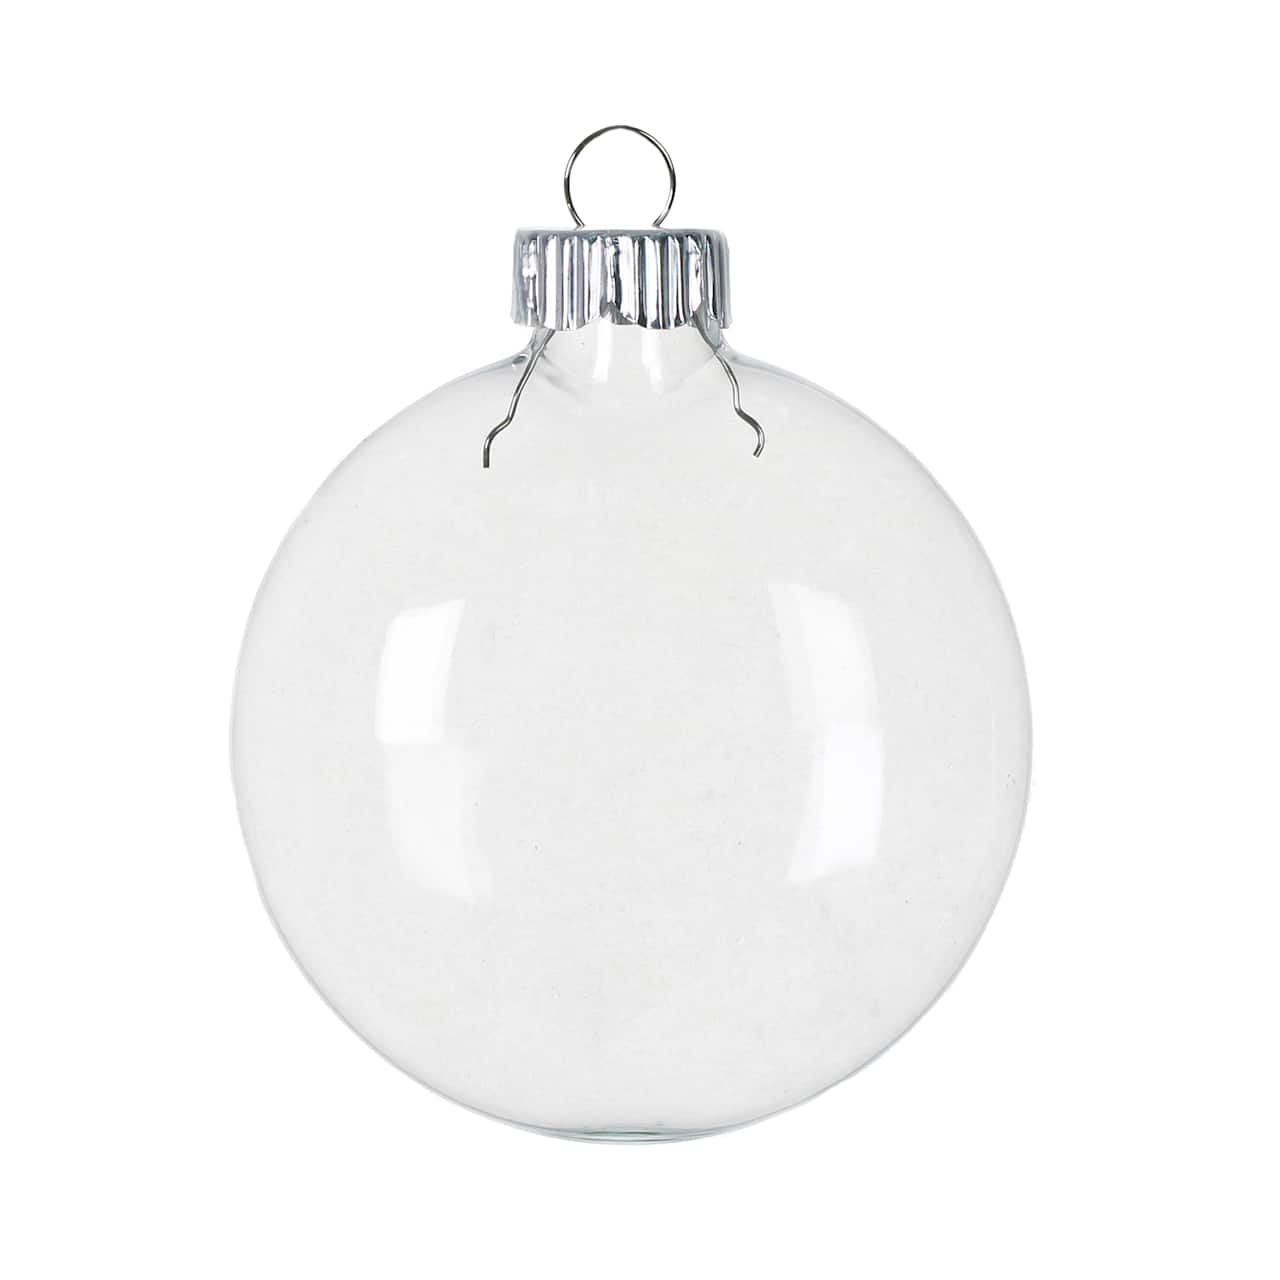 100mm Plastic Clear Disc Ornament by Make Market®